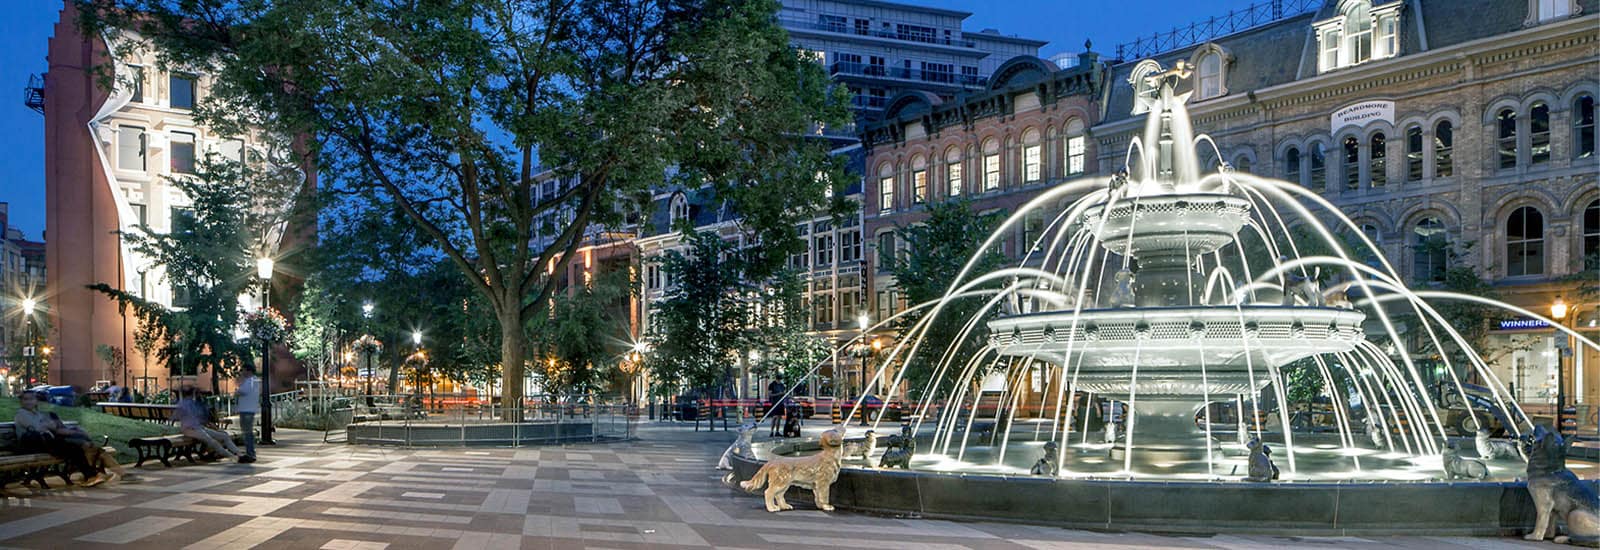 What to See in Old Town Toronto: Berczy Park